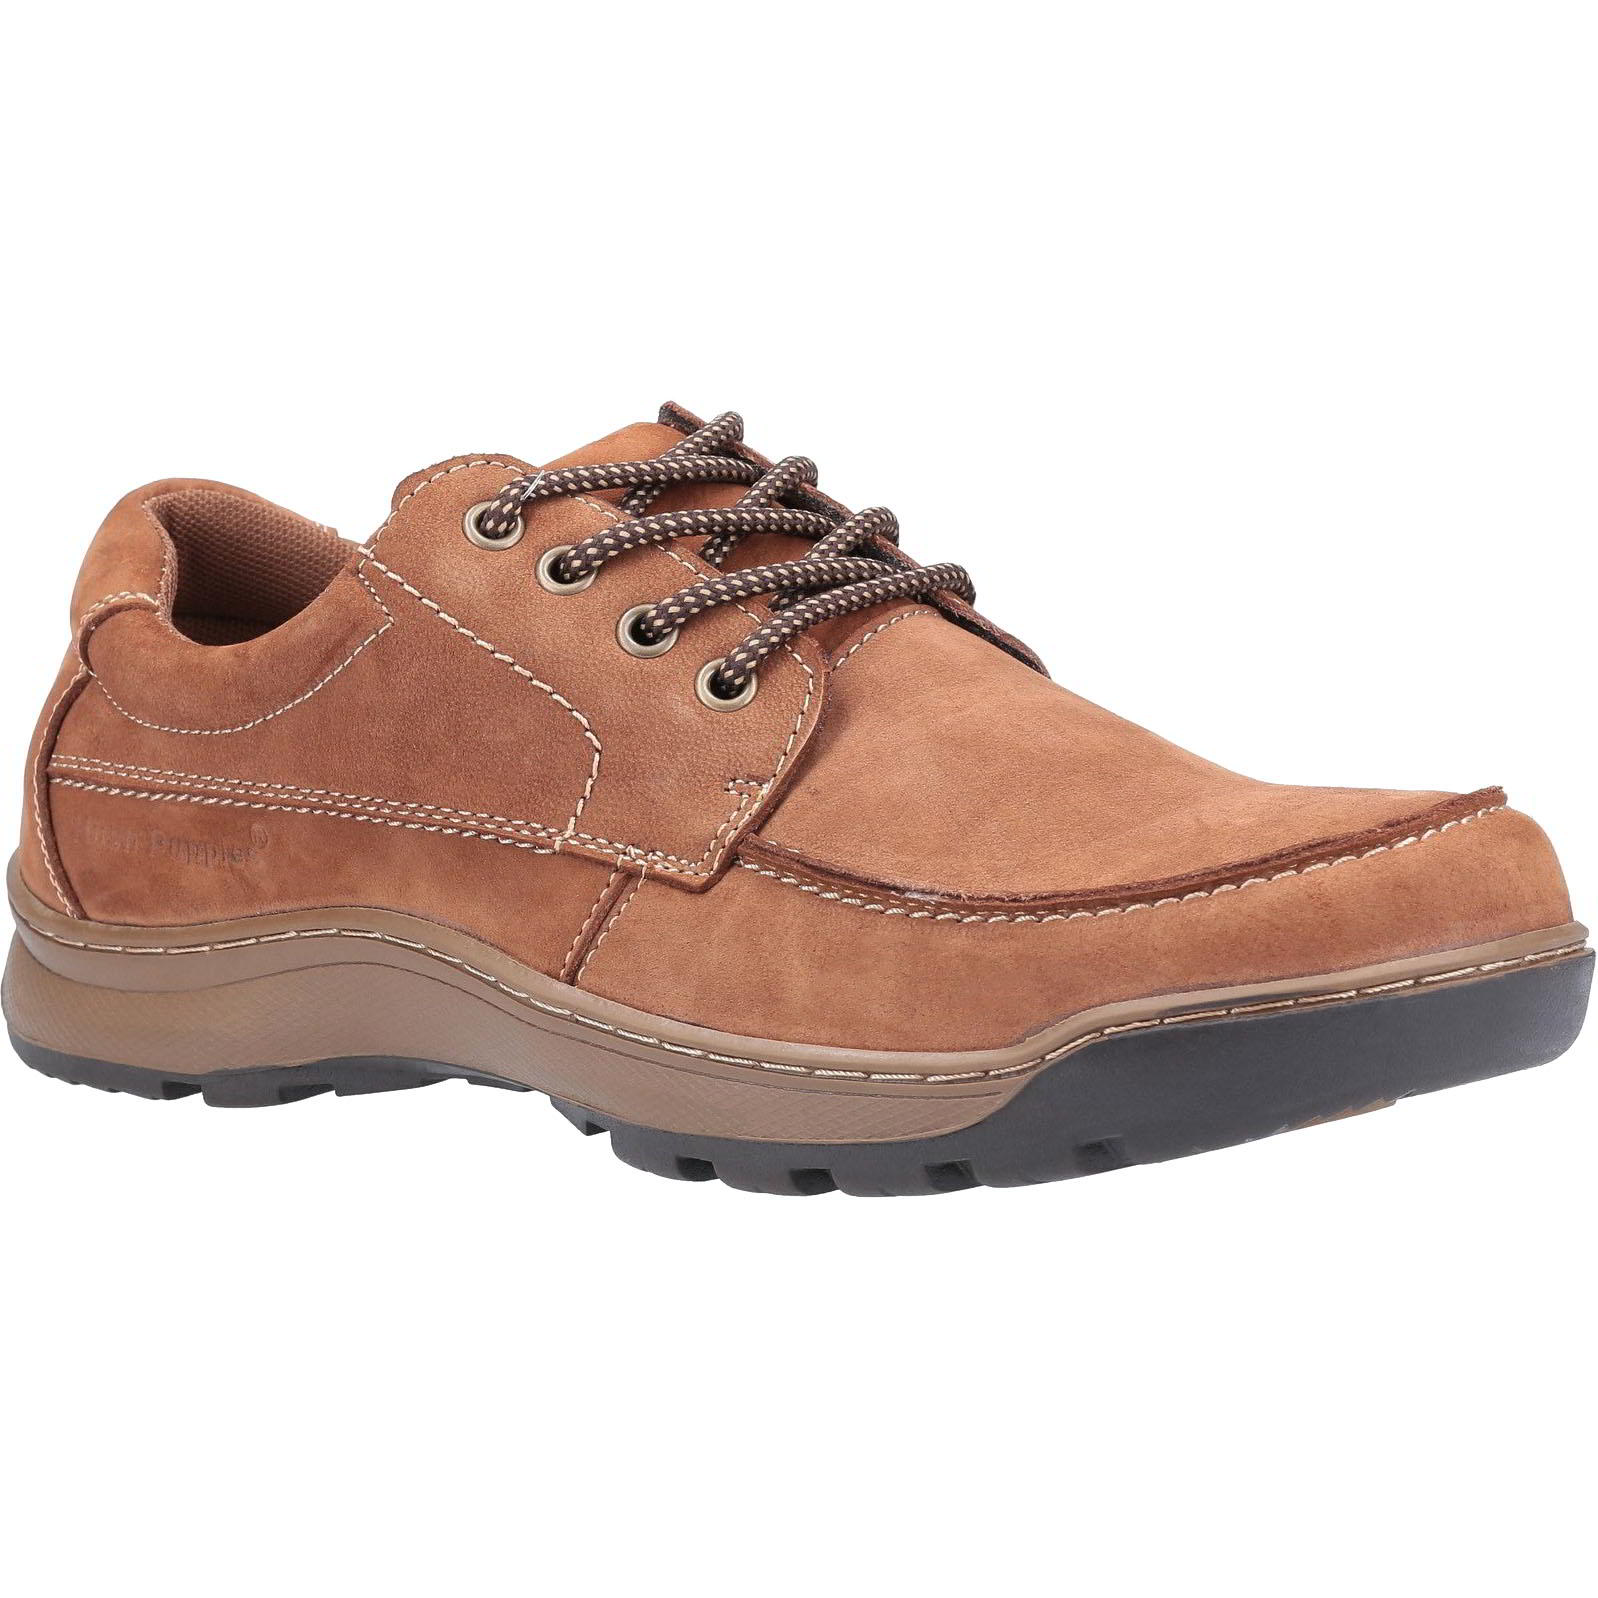 Hush Puppies Men's Tucker Leather Lace Up Shoes - UK 10